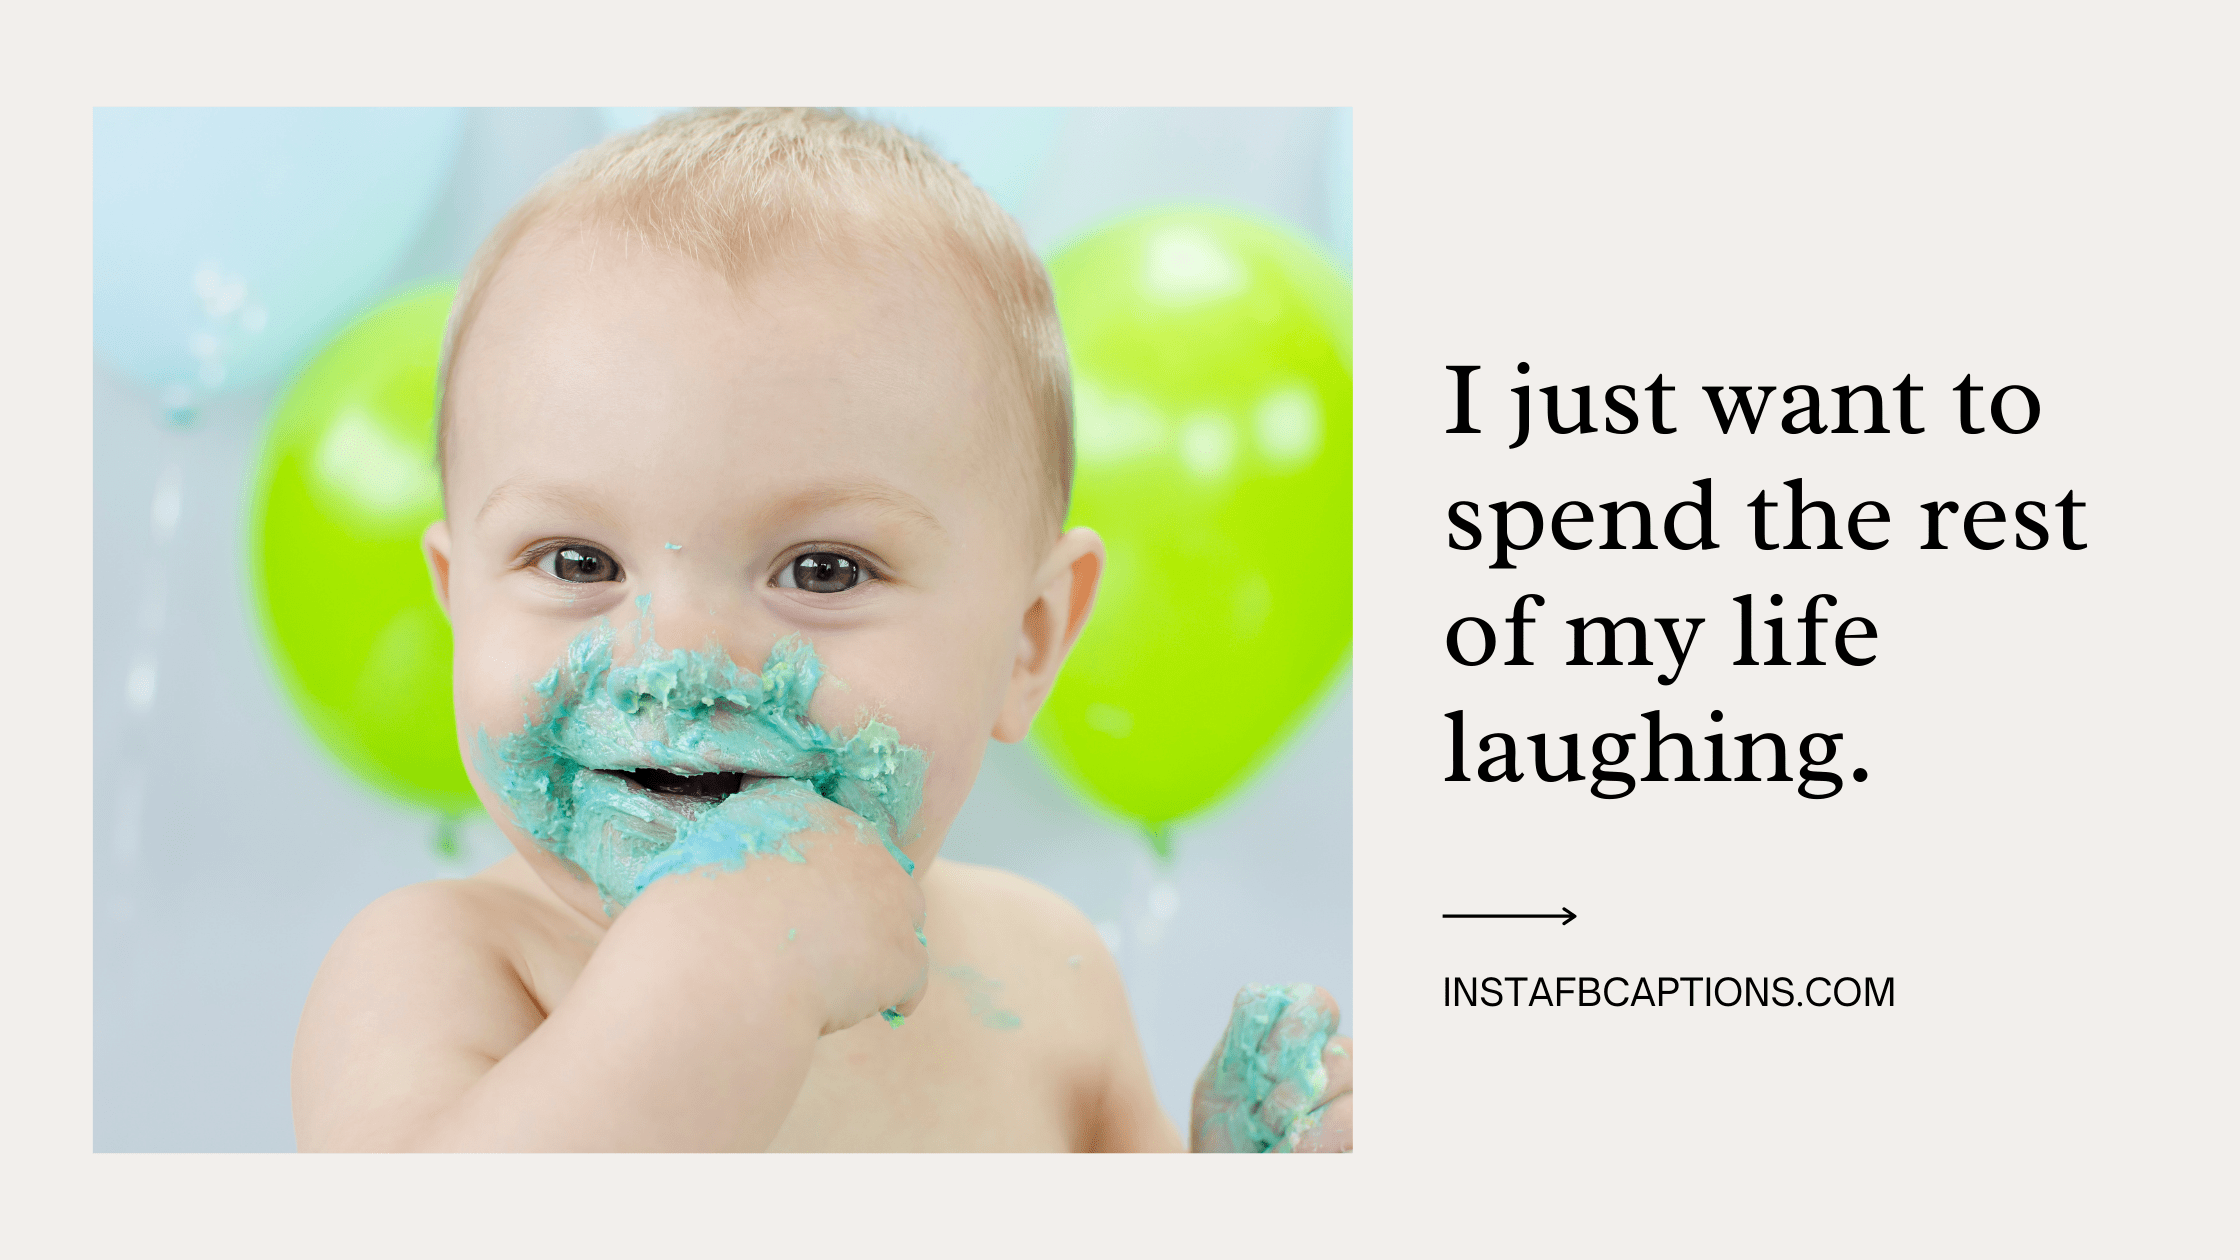 Baby Laughing Captions  - Baby Laughing Captions - 92 Funny Laughing Instagram Captions in 2023